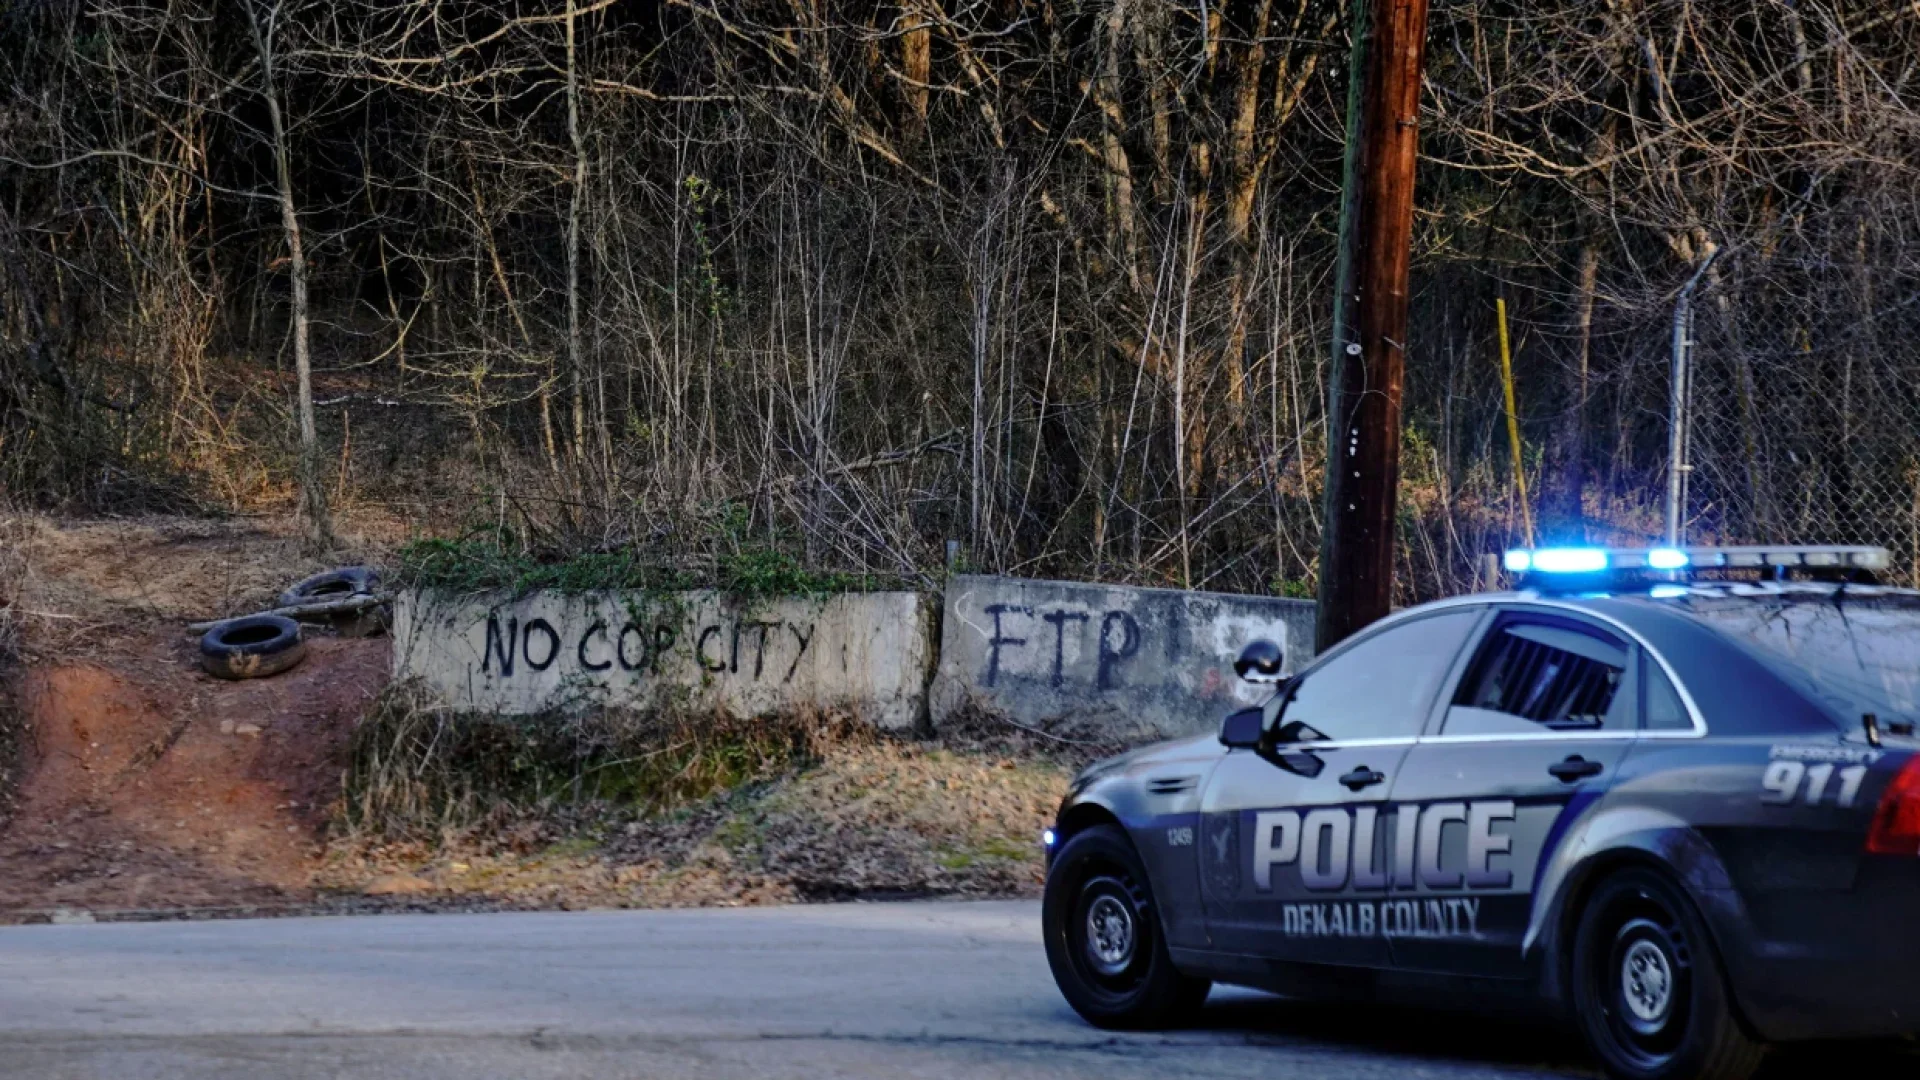 Atlanta City Council Approves Millions For Controversial 'Cop City' Training Facility